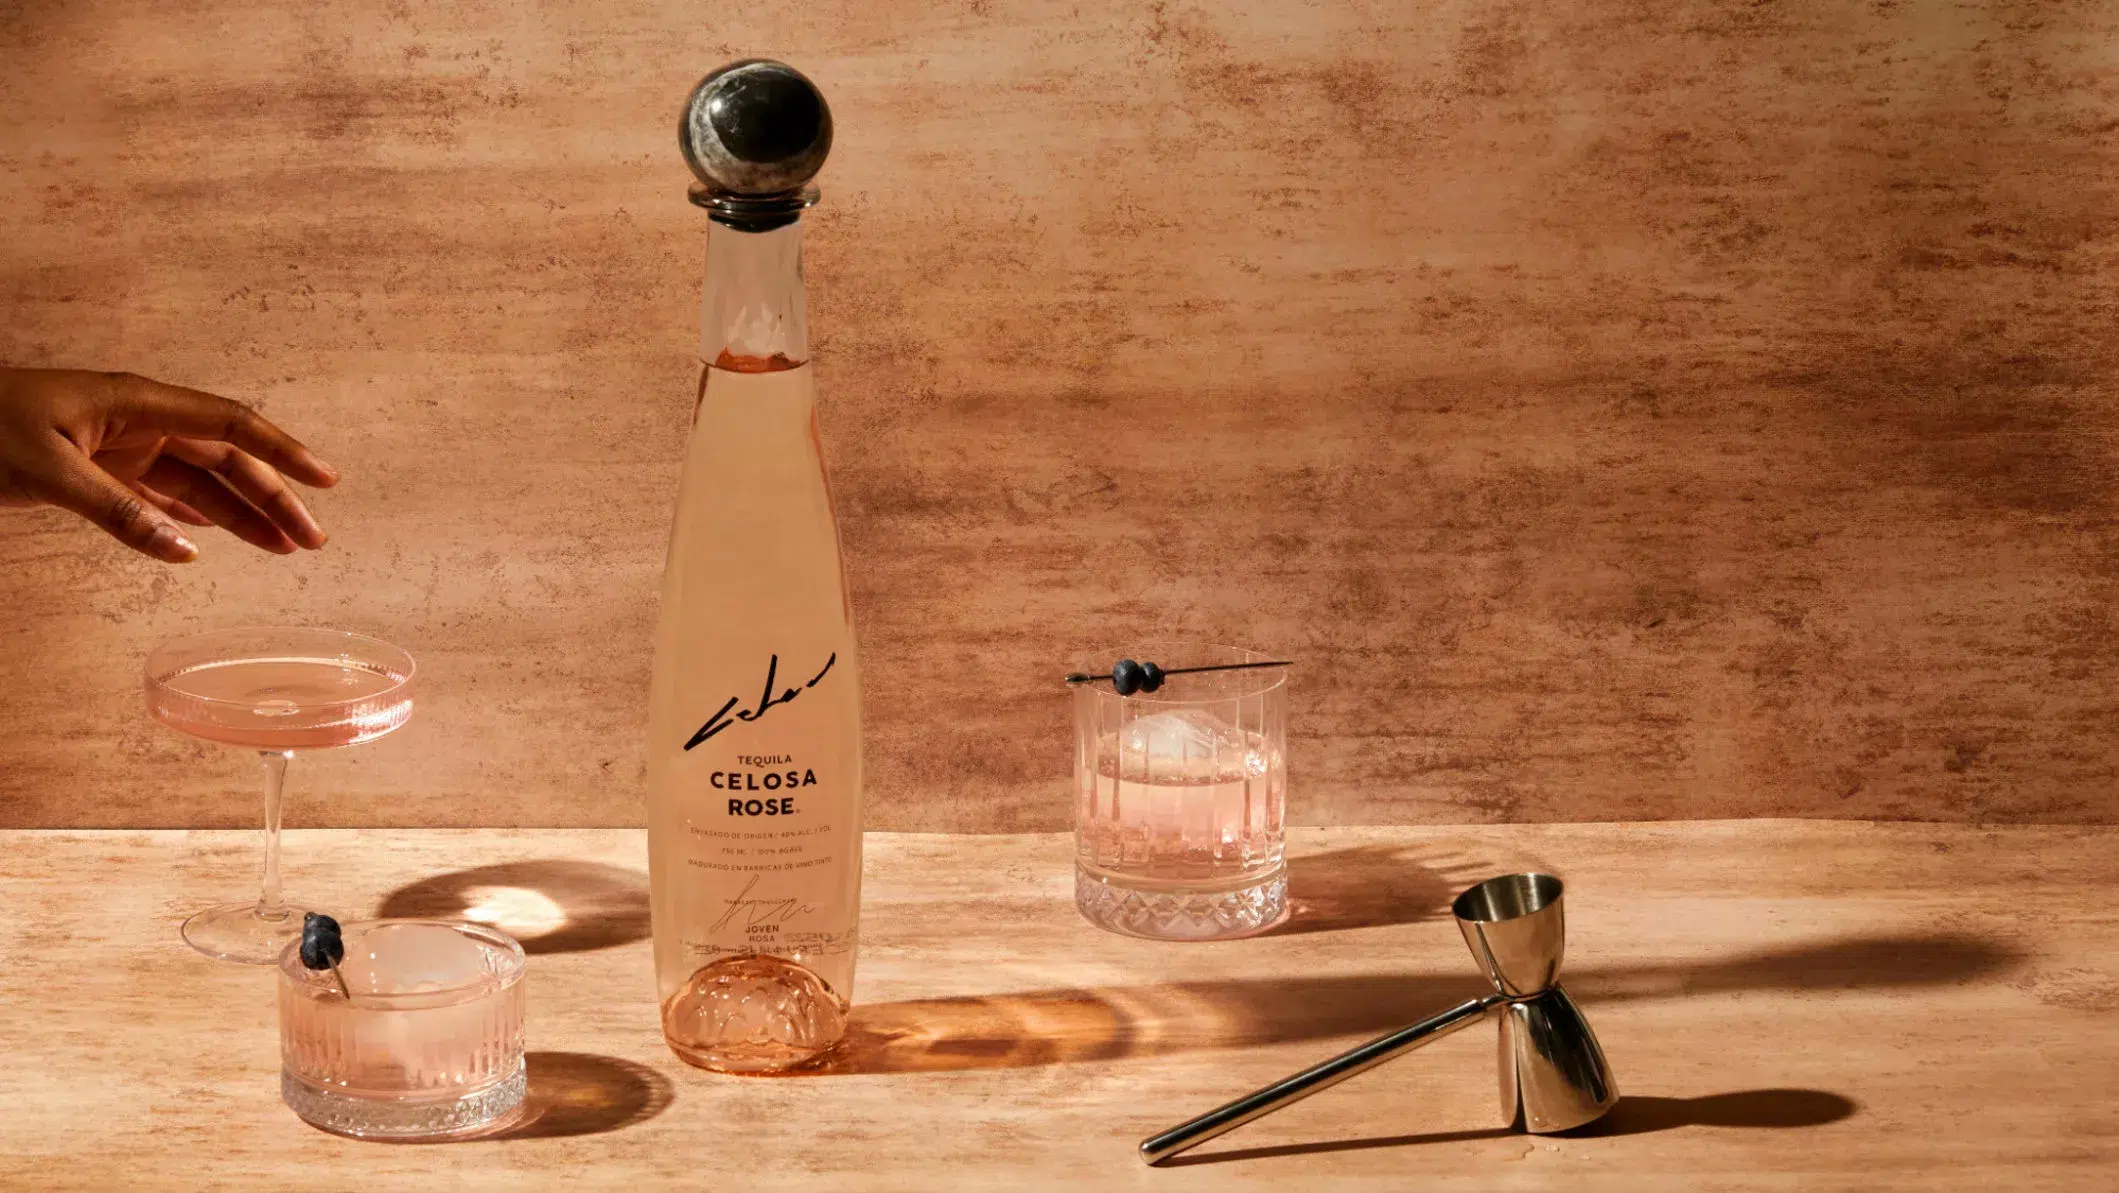 Cocktails derived from Luxury Celosa Rose Tequila to showcase its versatility.